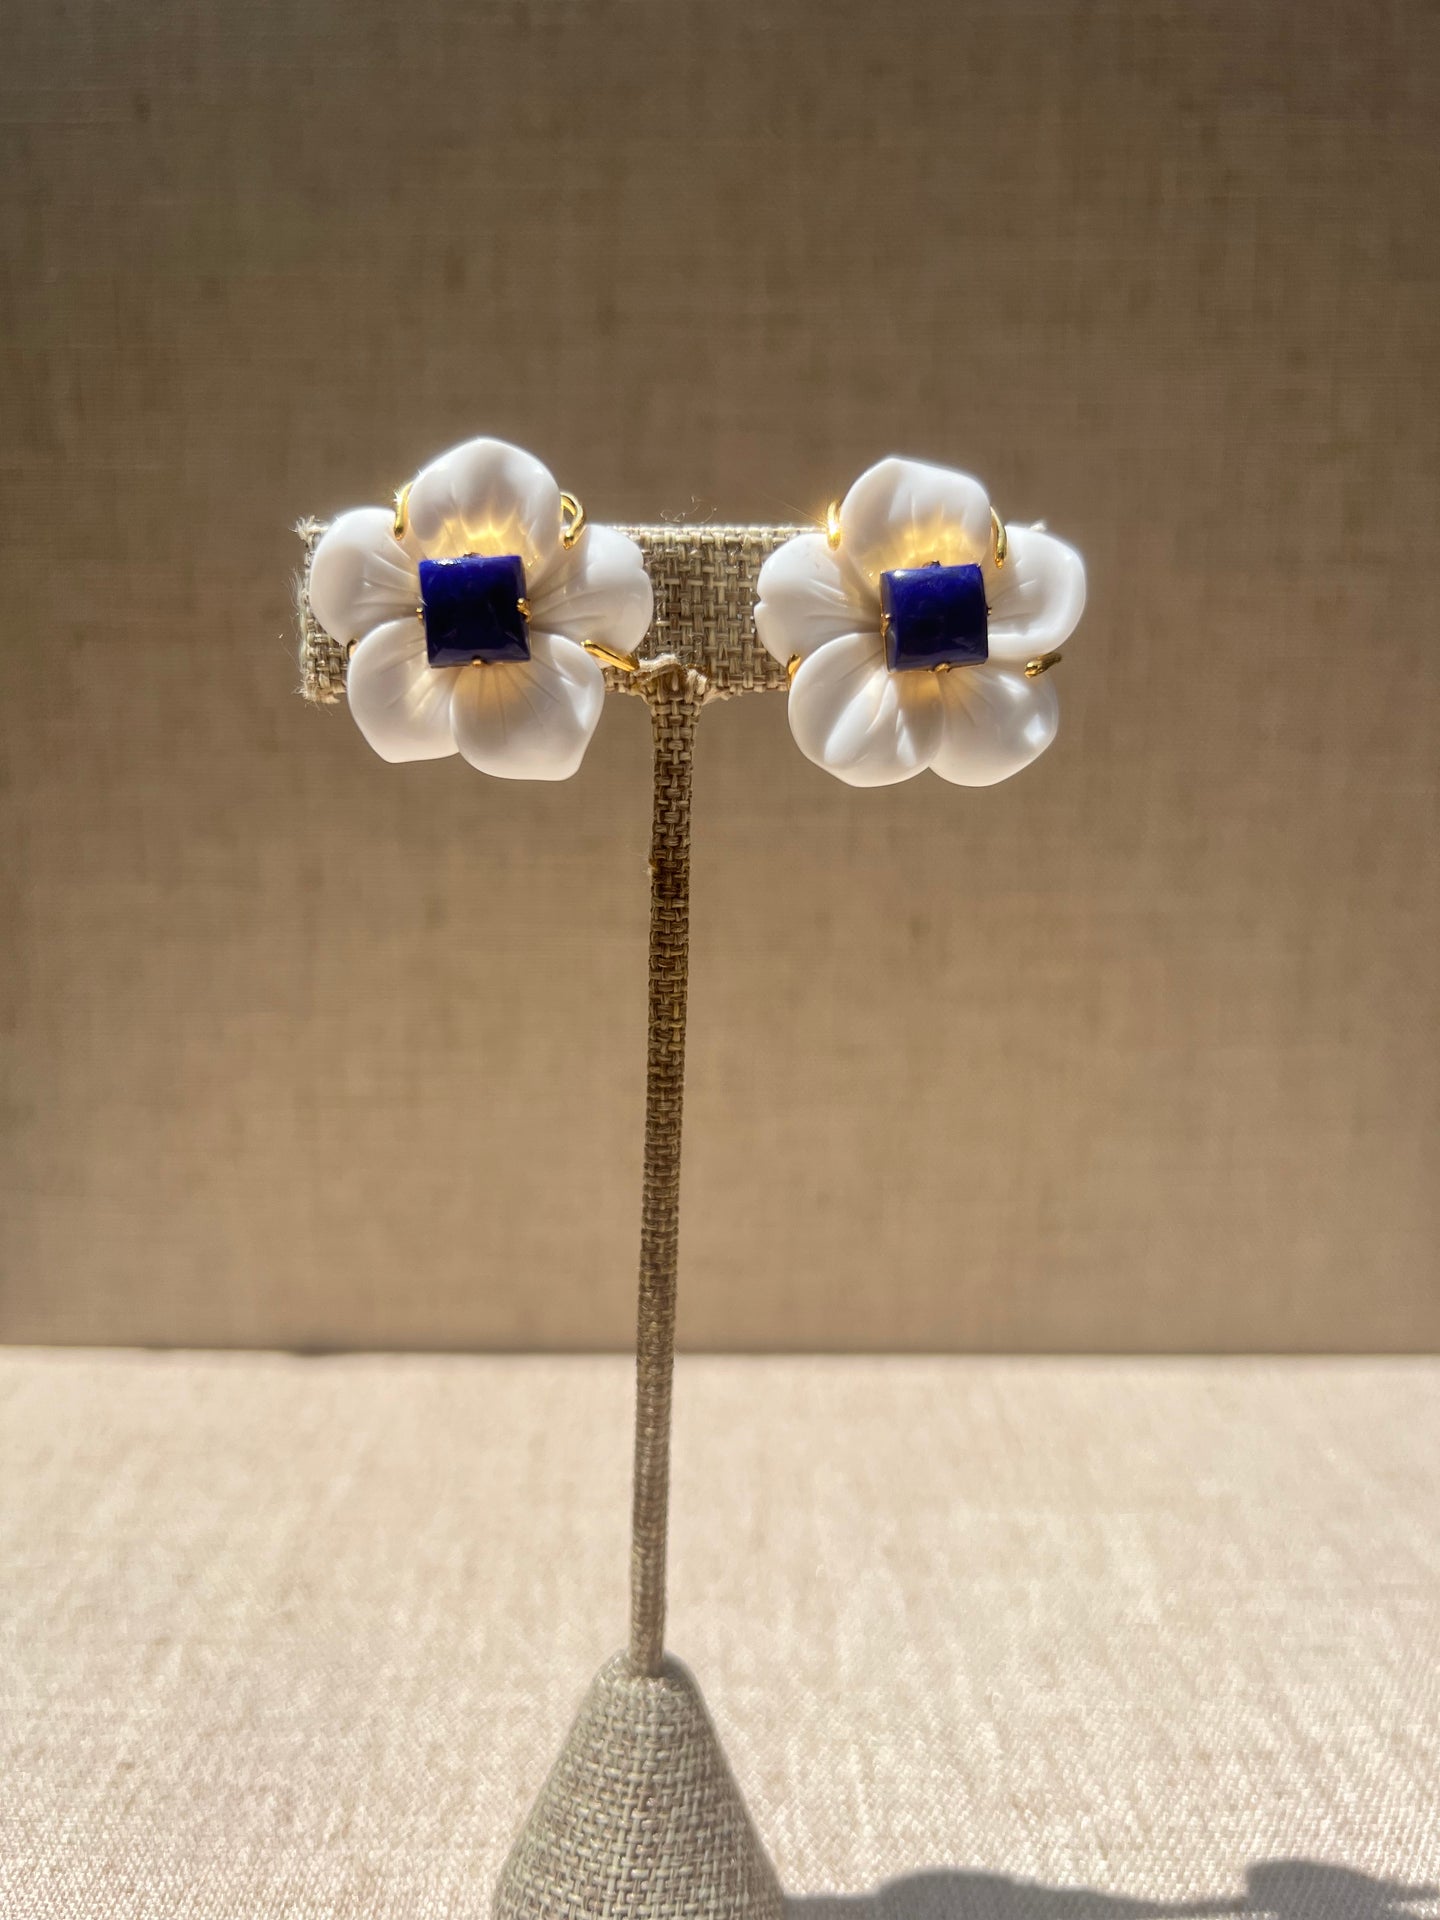 Carved White Agate Flower with Lapis Center Earrings